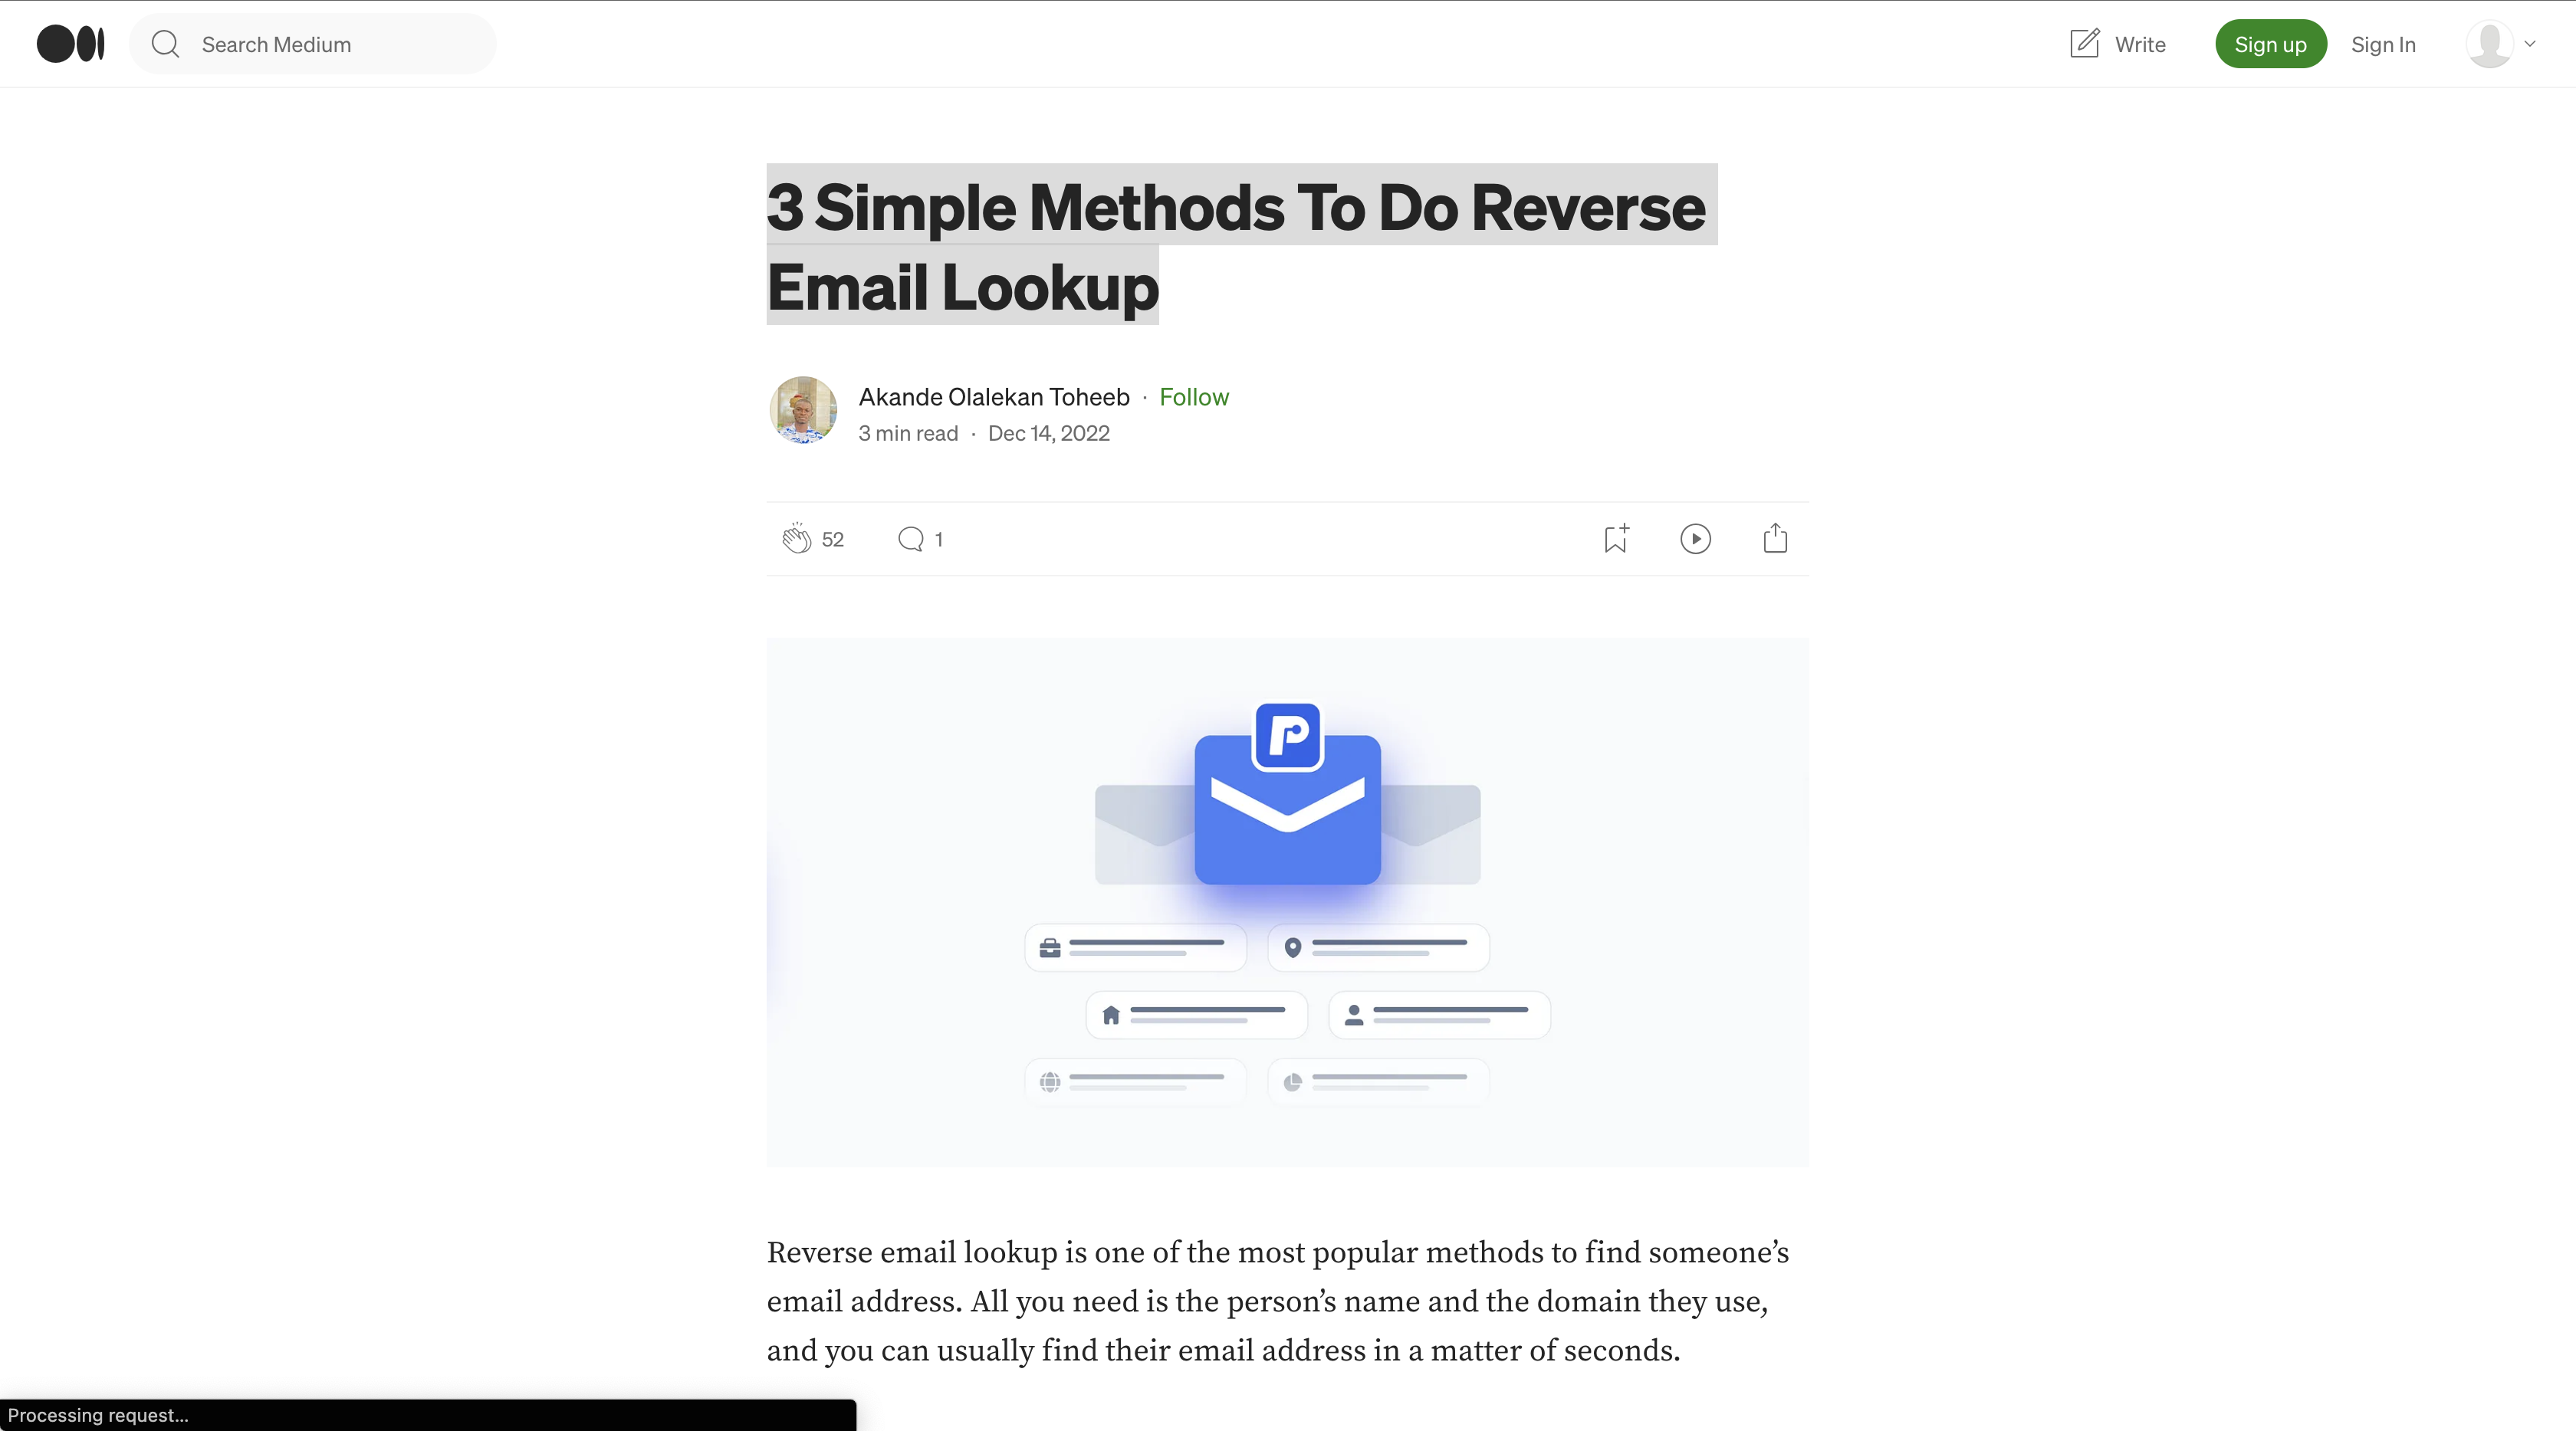 3 Simple Methods To Do Reverse Email Lookup